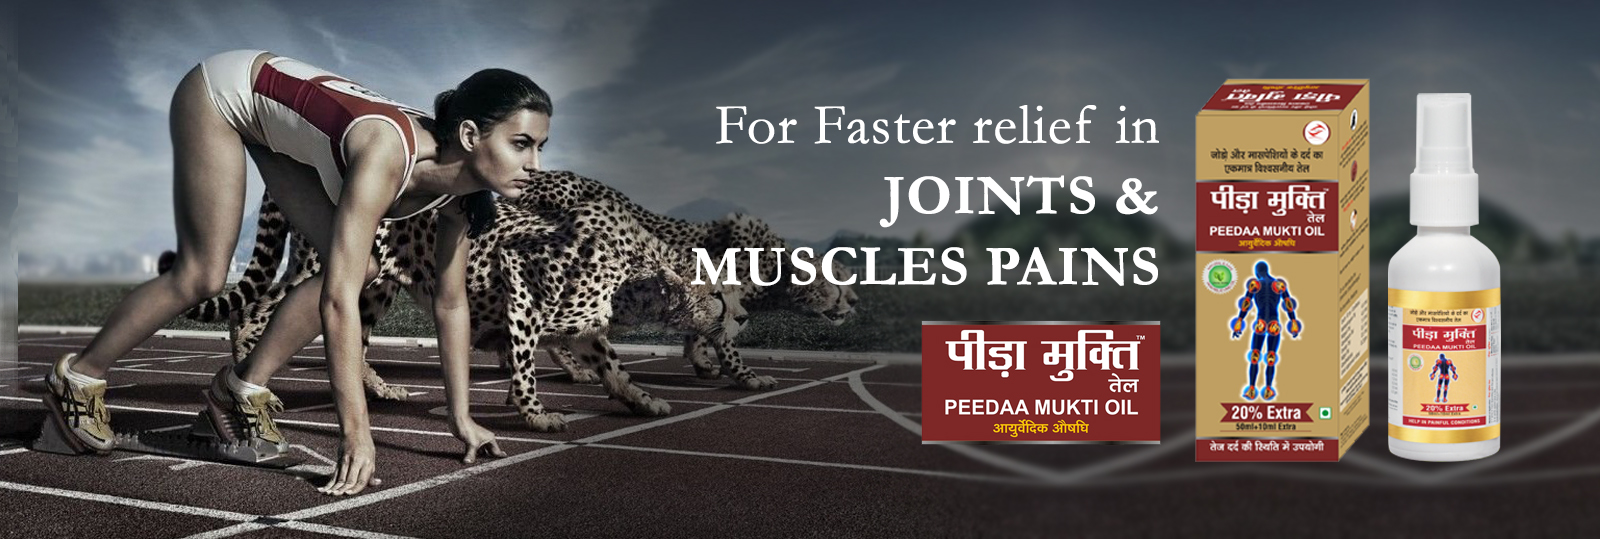 faster relief in joints and muscles pain